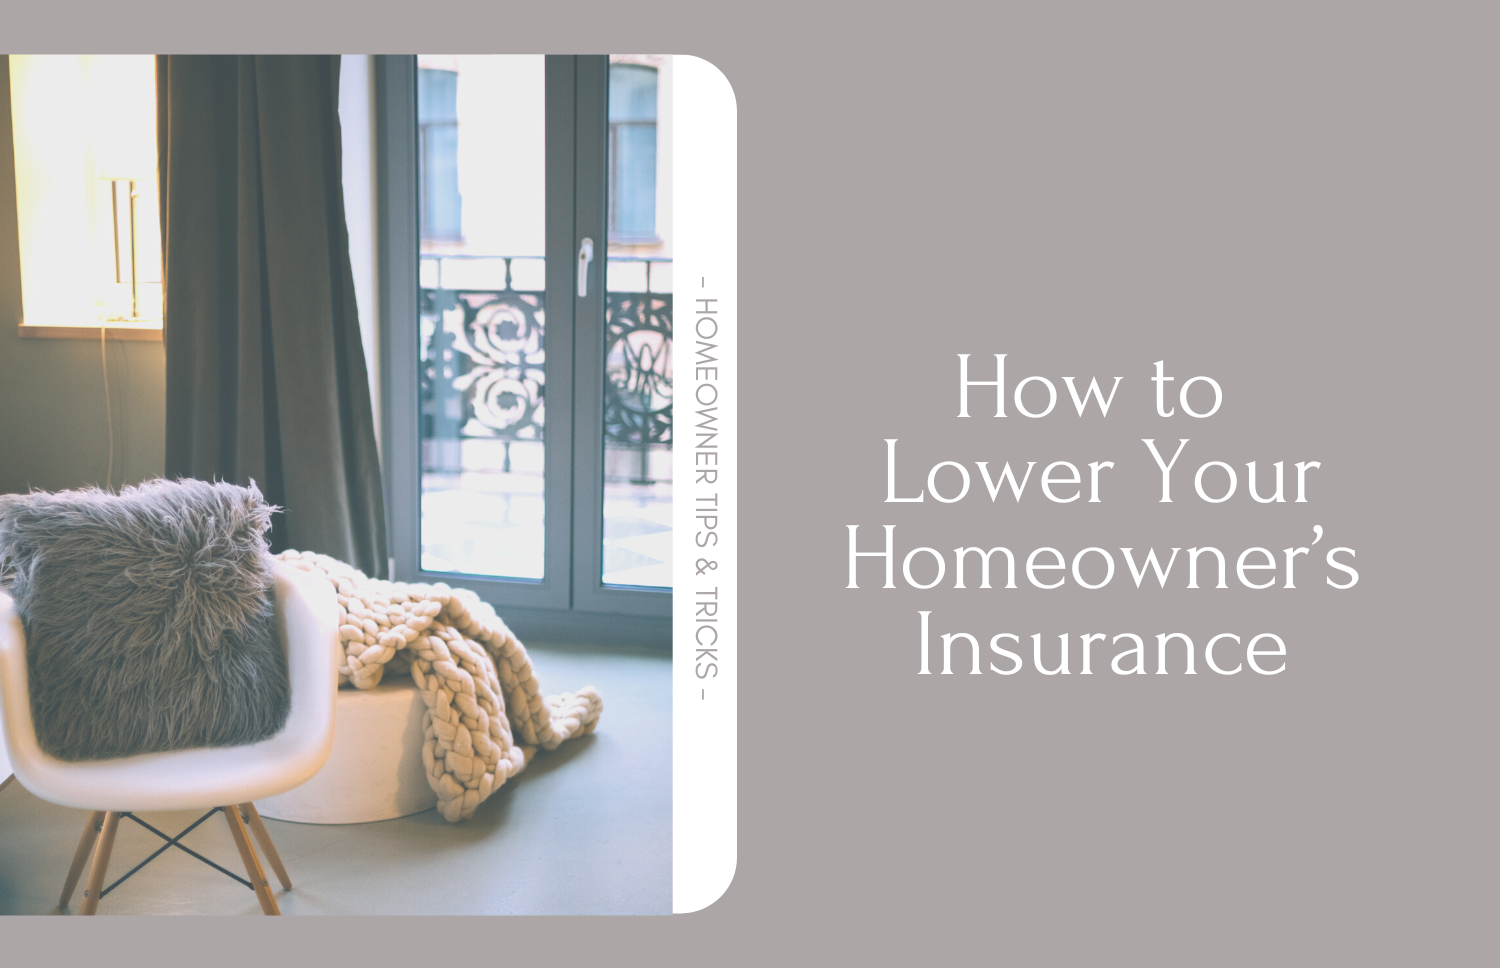 Quick Tips to Lower Your Homeowner Insurance